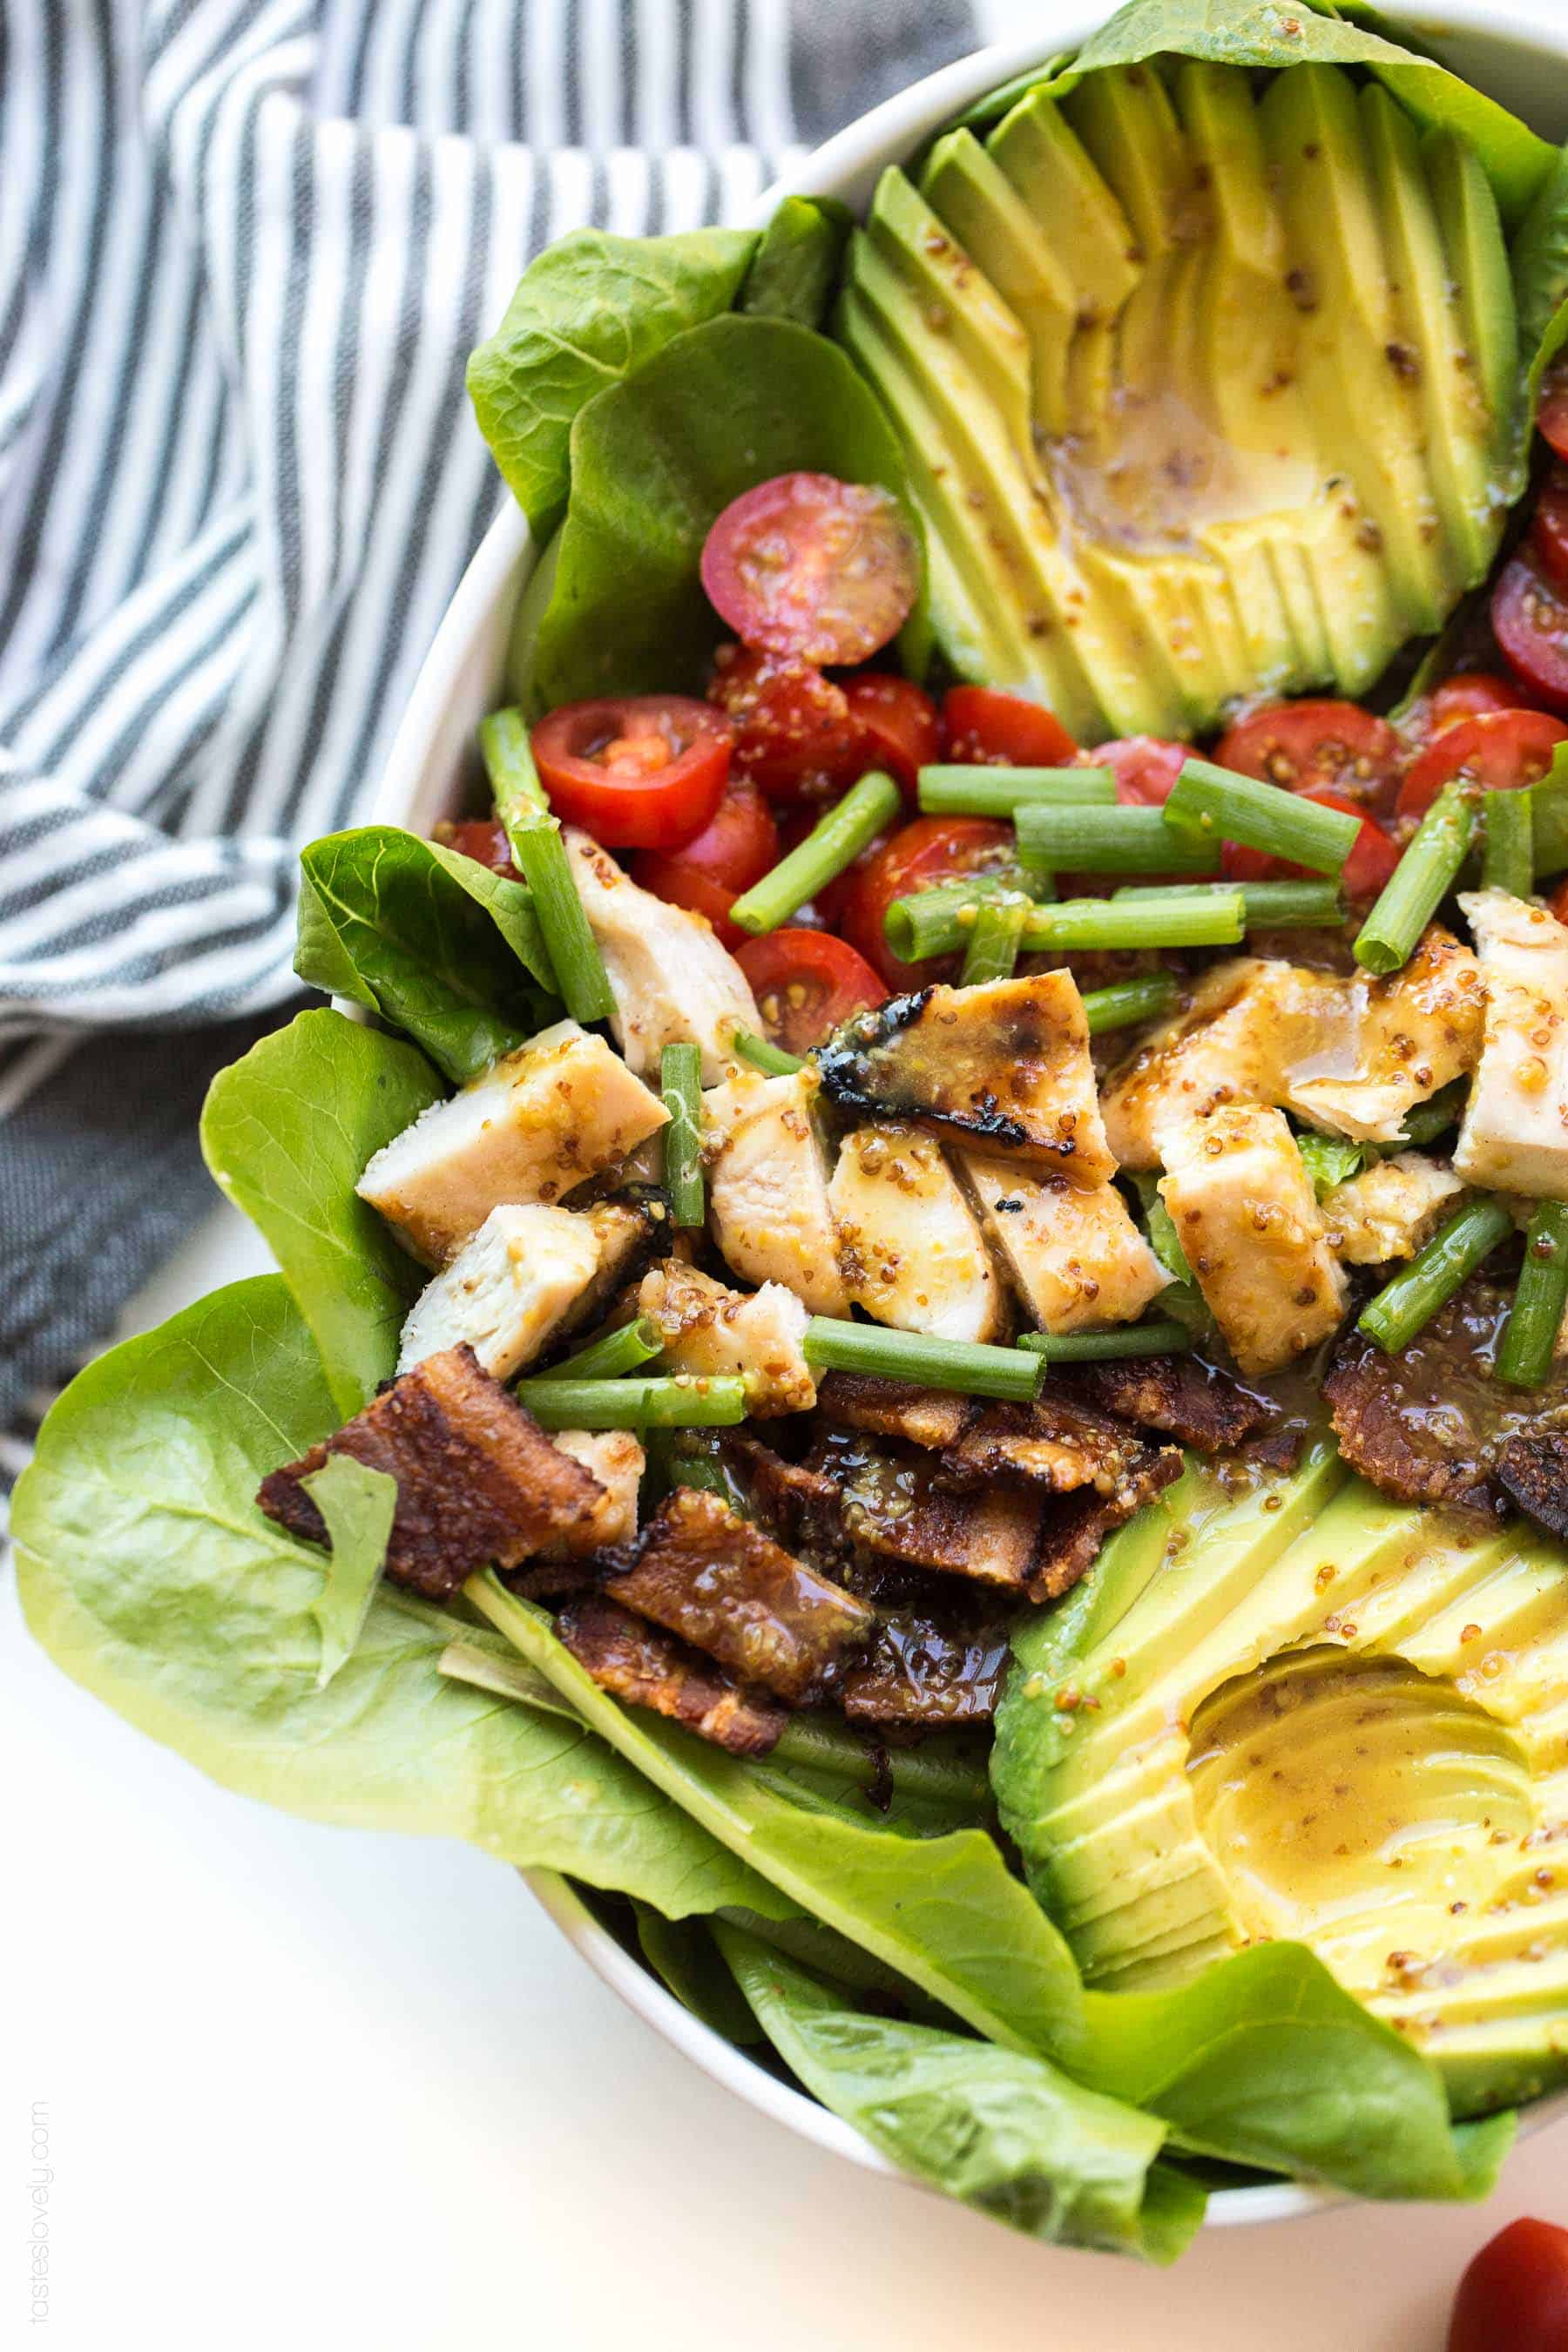 Paleo Honey Mustard Chicken, Bacon & Avocado Salad with tomatoes. A delicious and healthy summer dinner recipe that is paleo, gluten free, dairy free, refined sugar free.